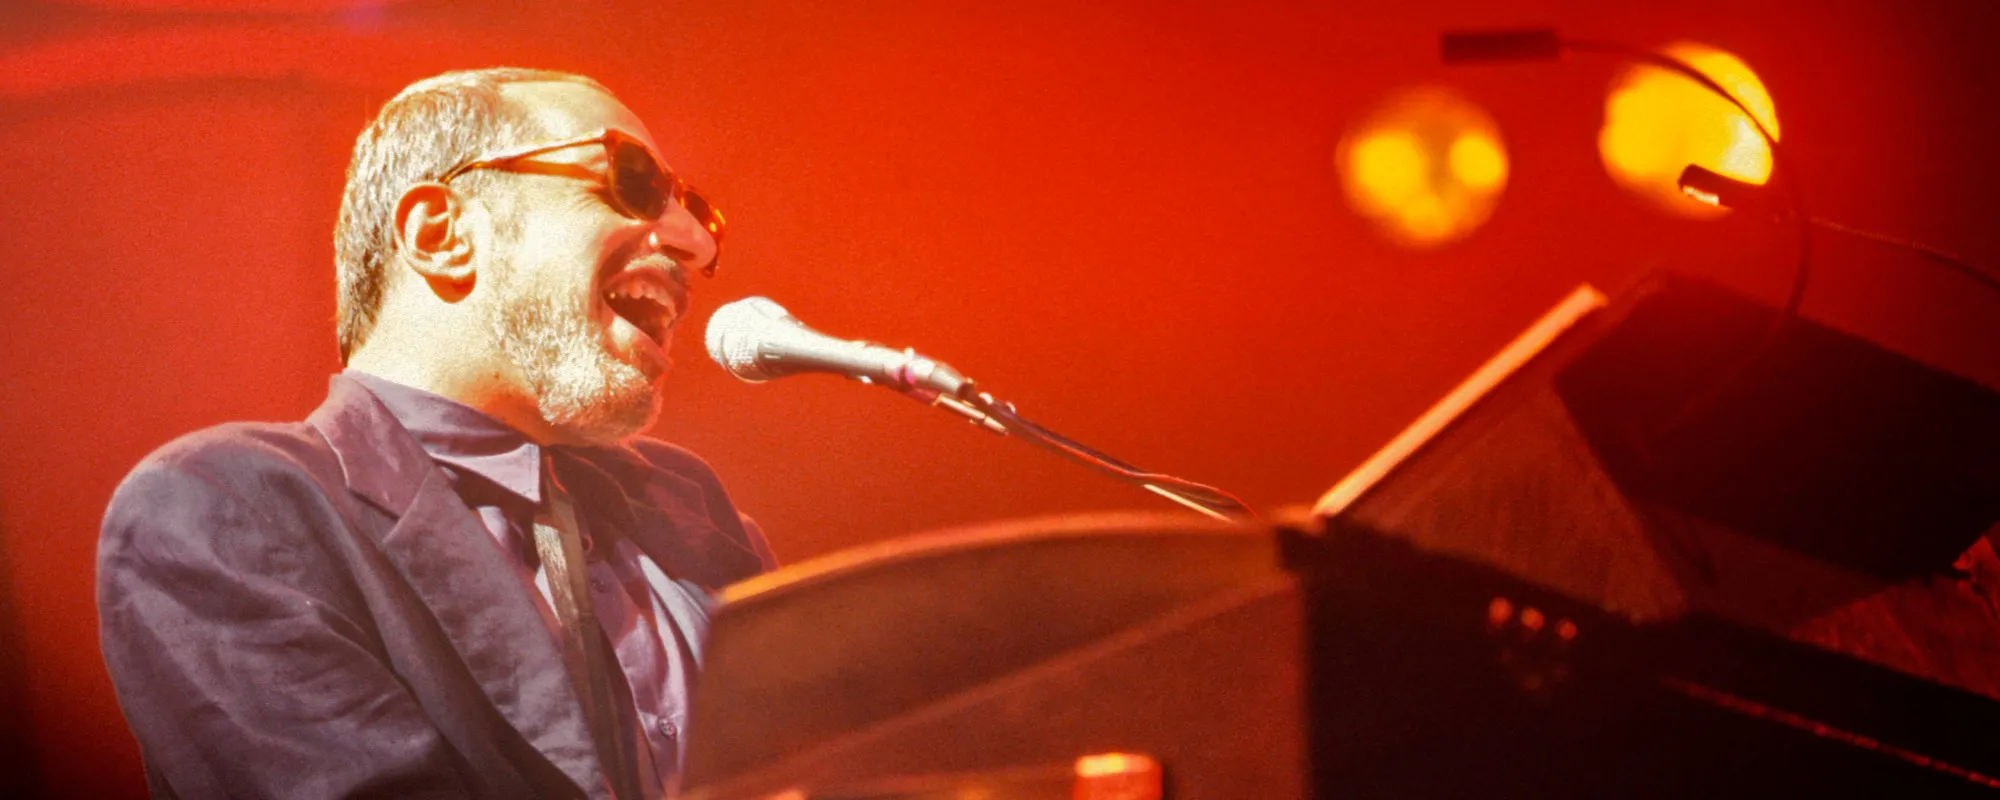 12 Quotes From Donald Fagen of Steely Dan